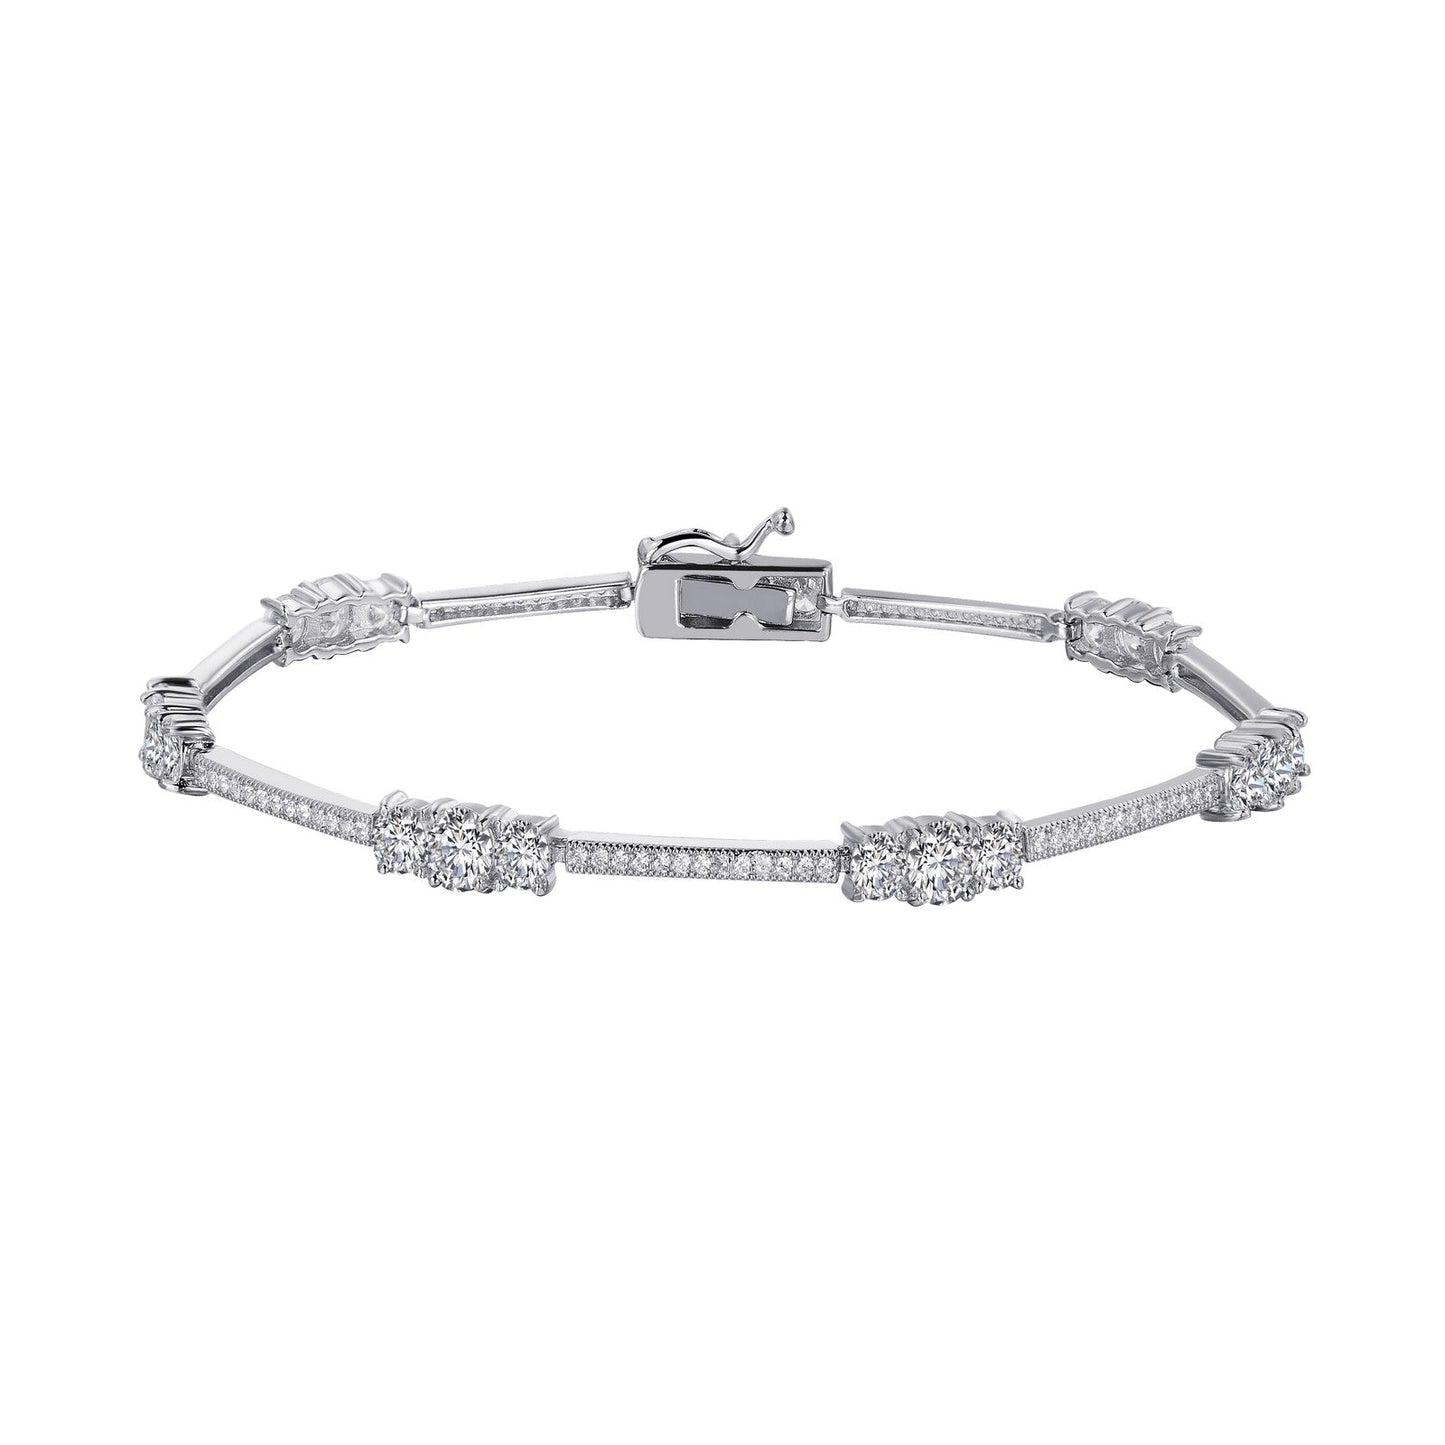 Load image into Gallery viewer, Lafonn Stylish Station Bracelet 128 Stone Count B0008CLP72
